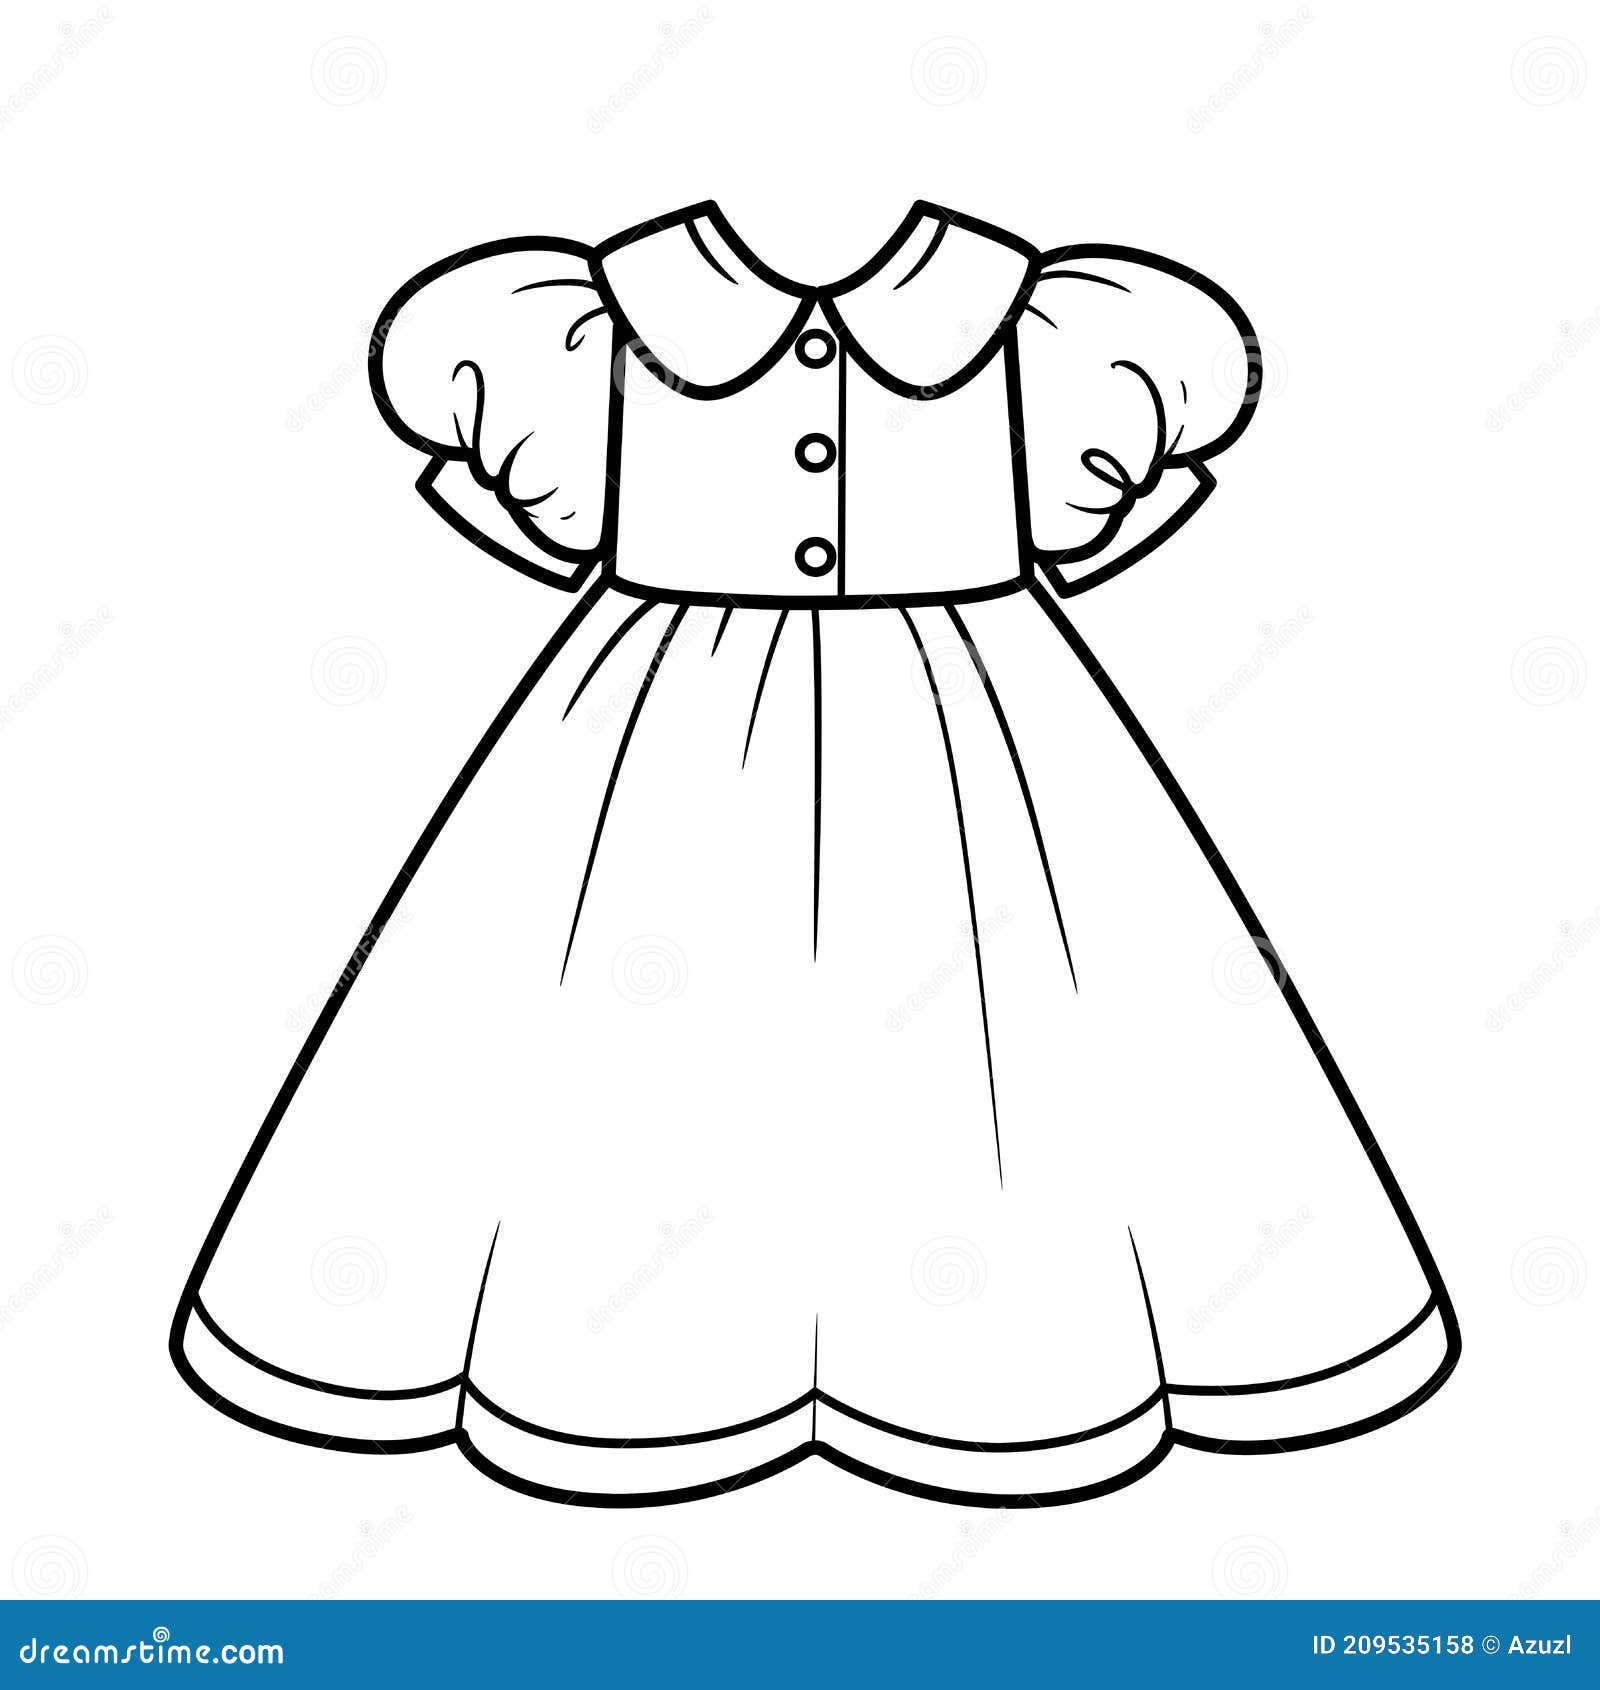 Girl Dress with a Lush Skirt Outline for Coloring on a White Stock Illustration - Illustration ...